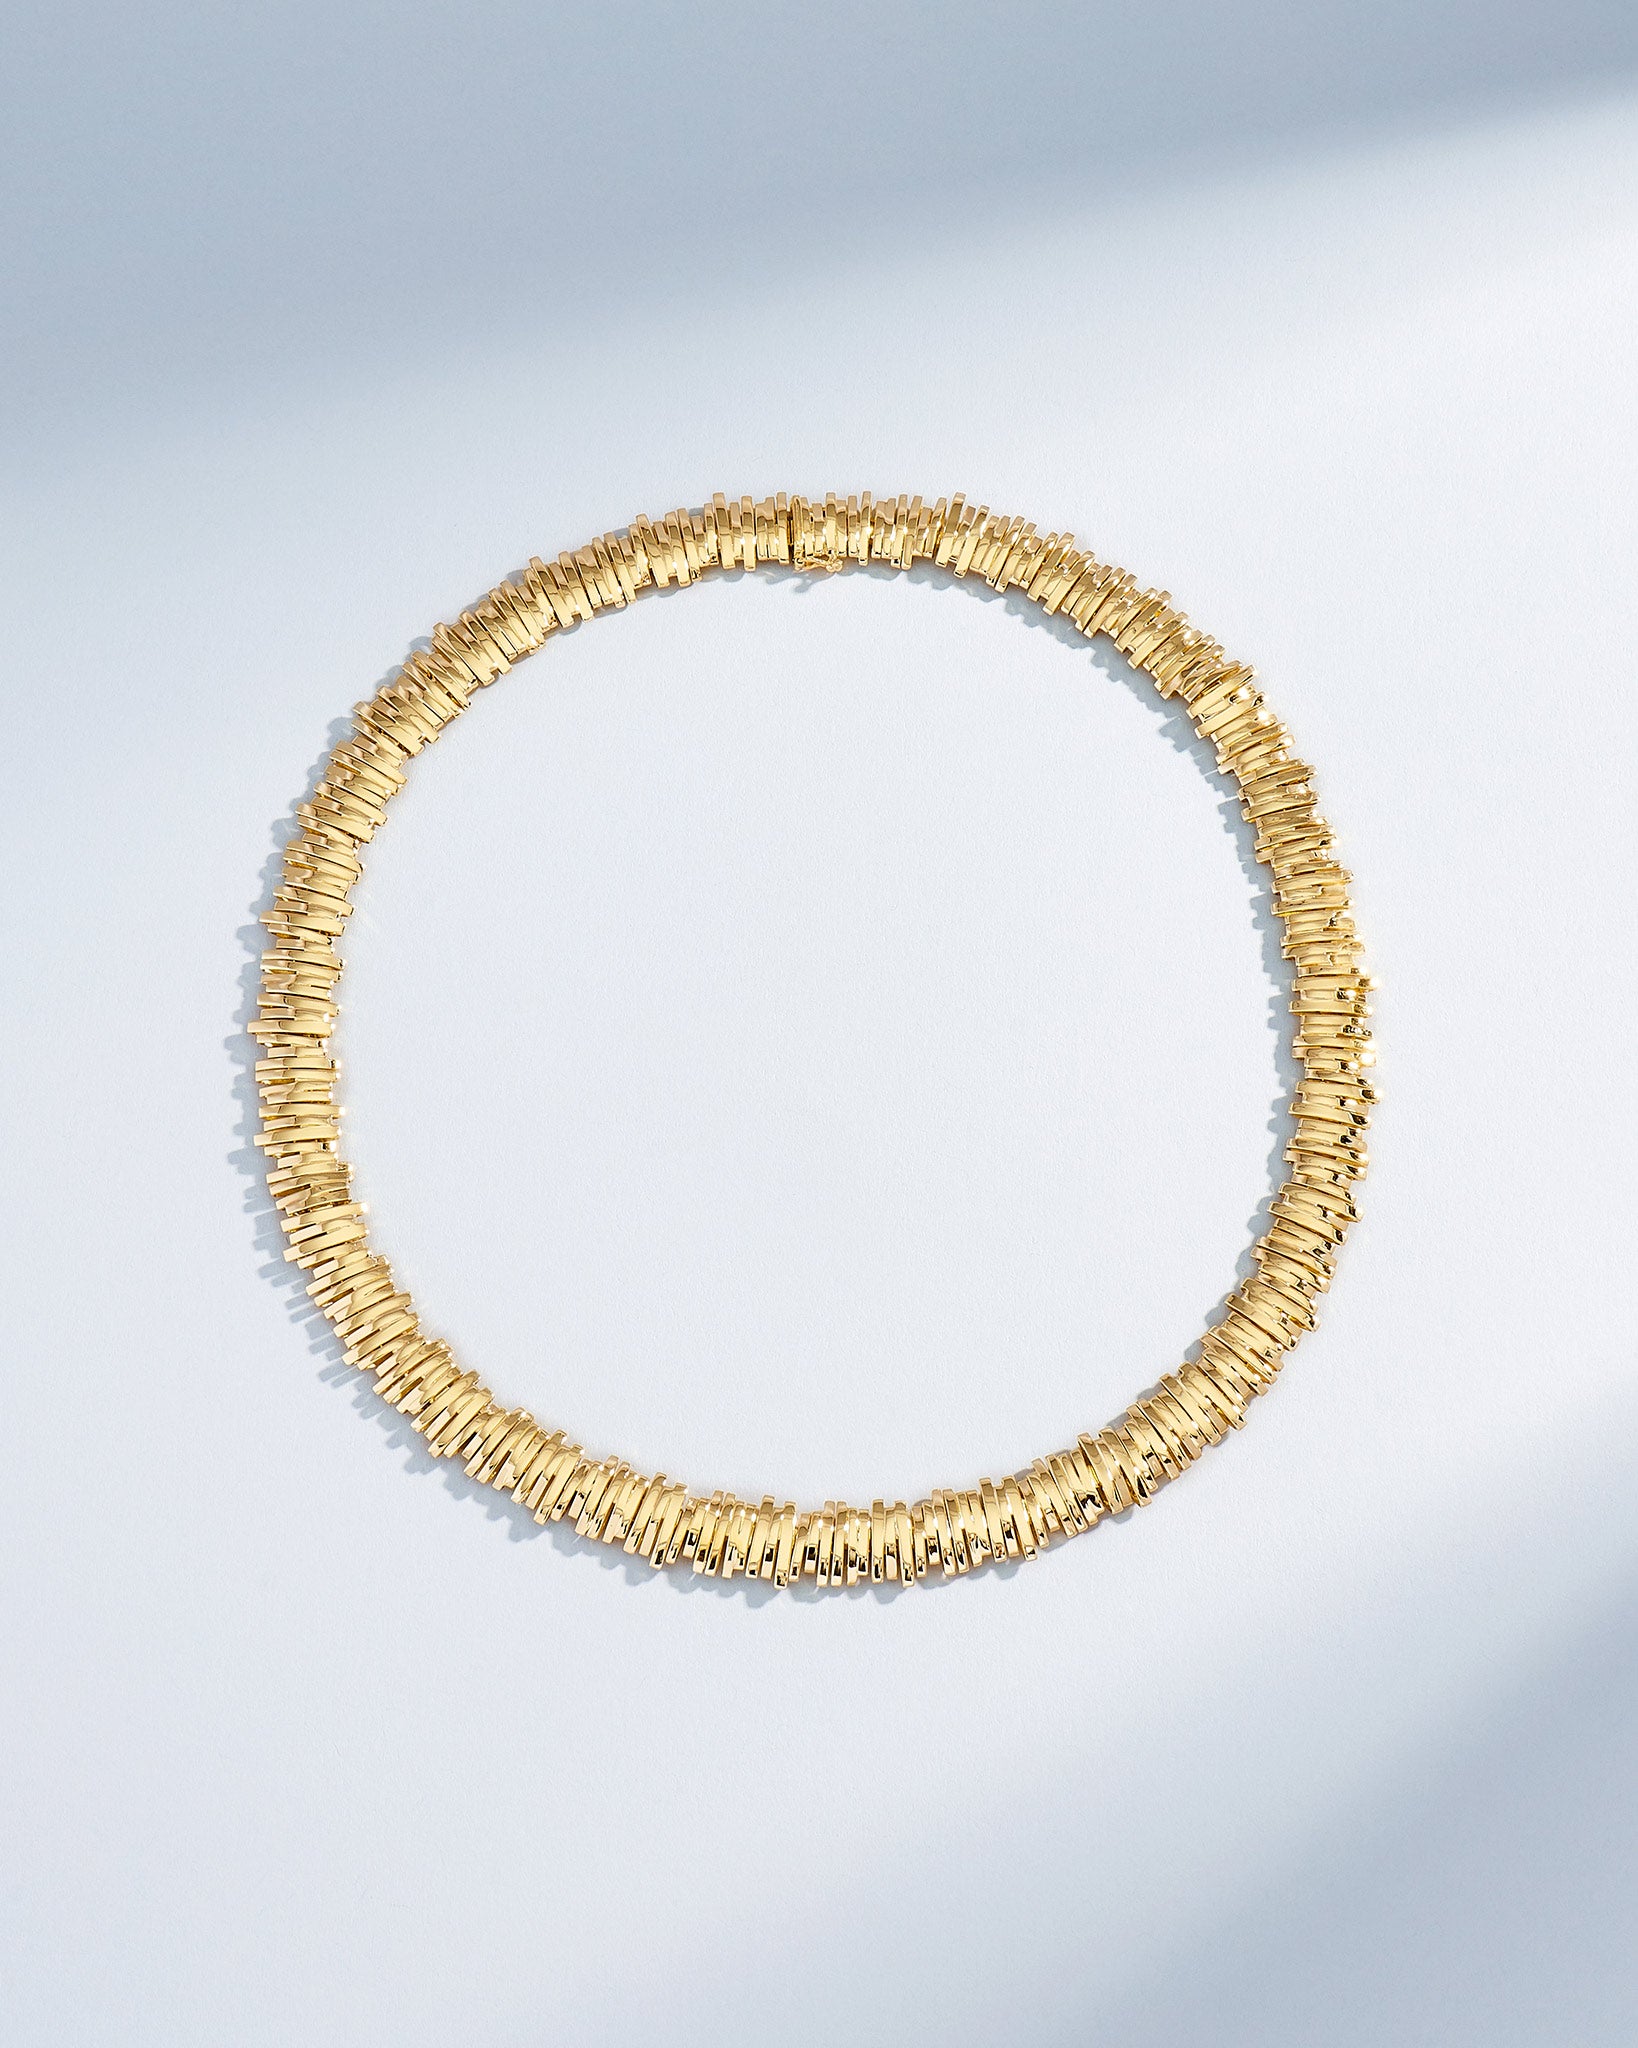 Suzanne Kalan Classic Gold Tennis Necklace in 18k yellow gold